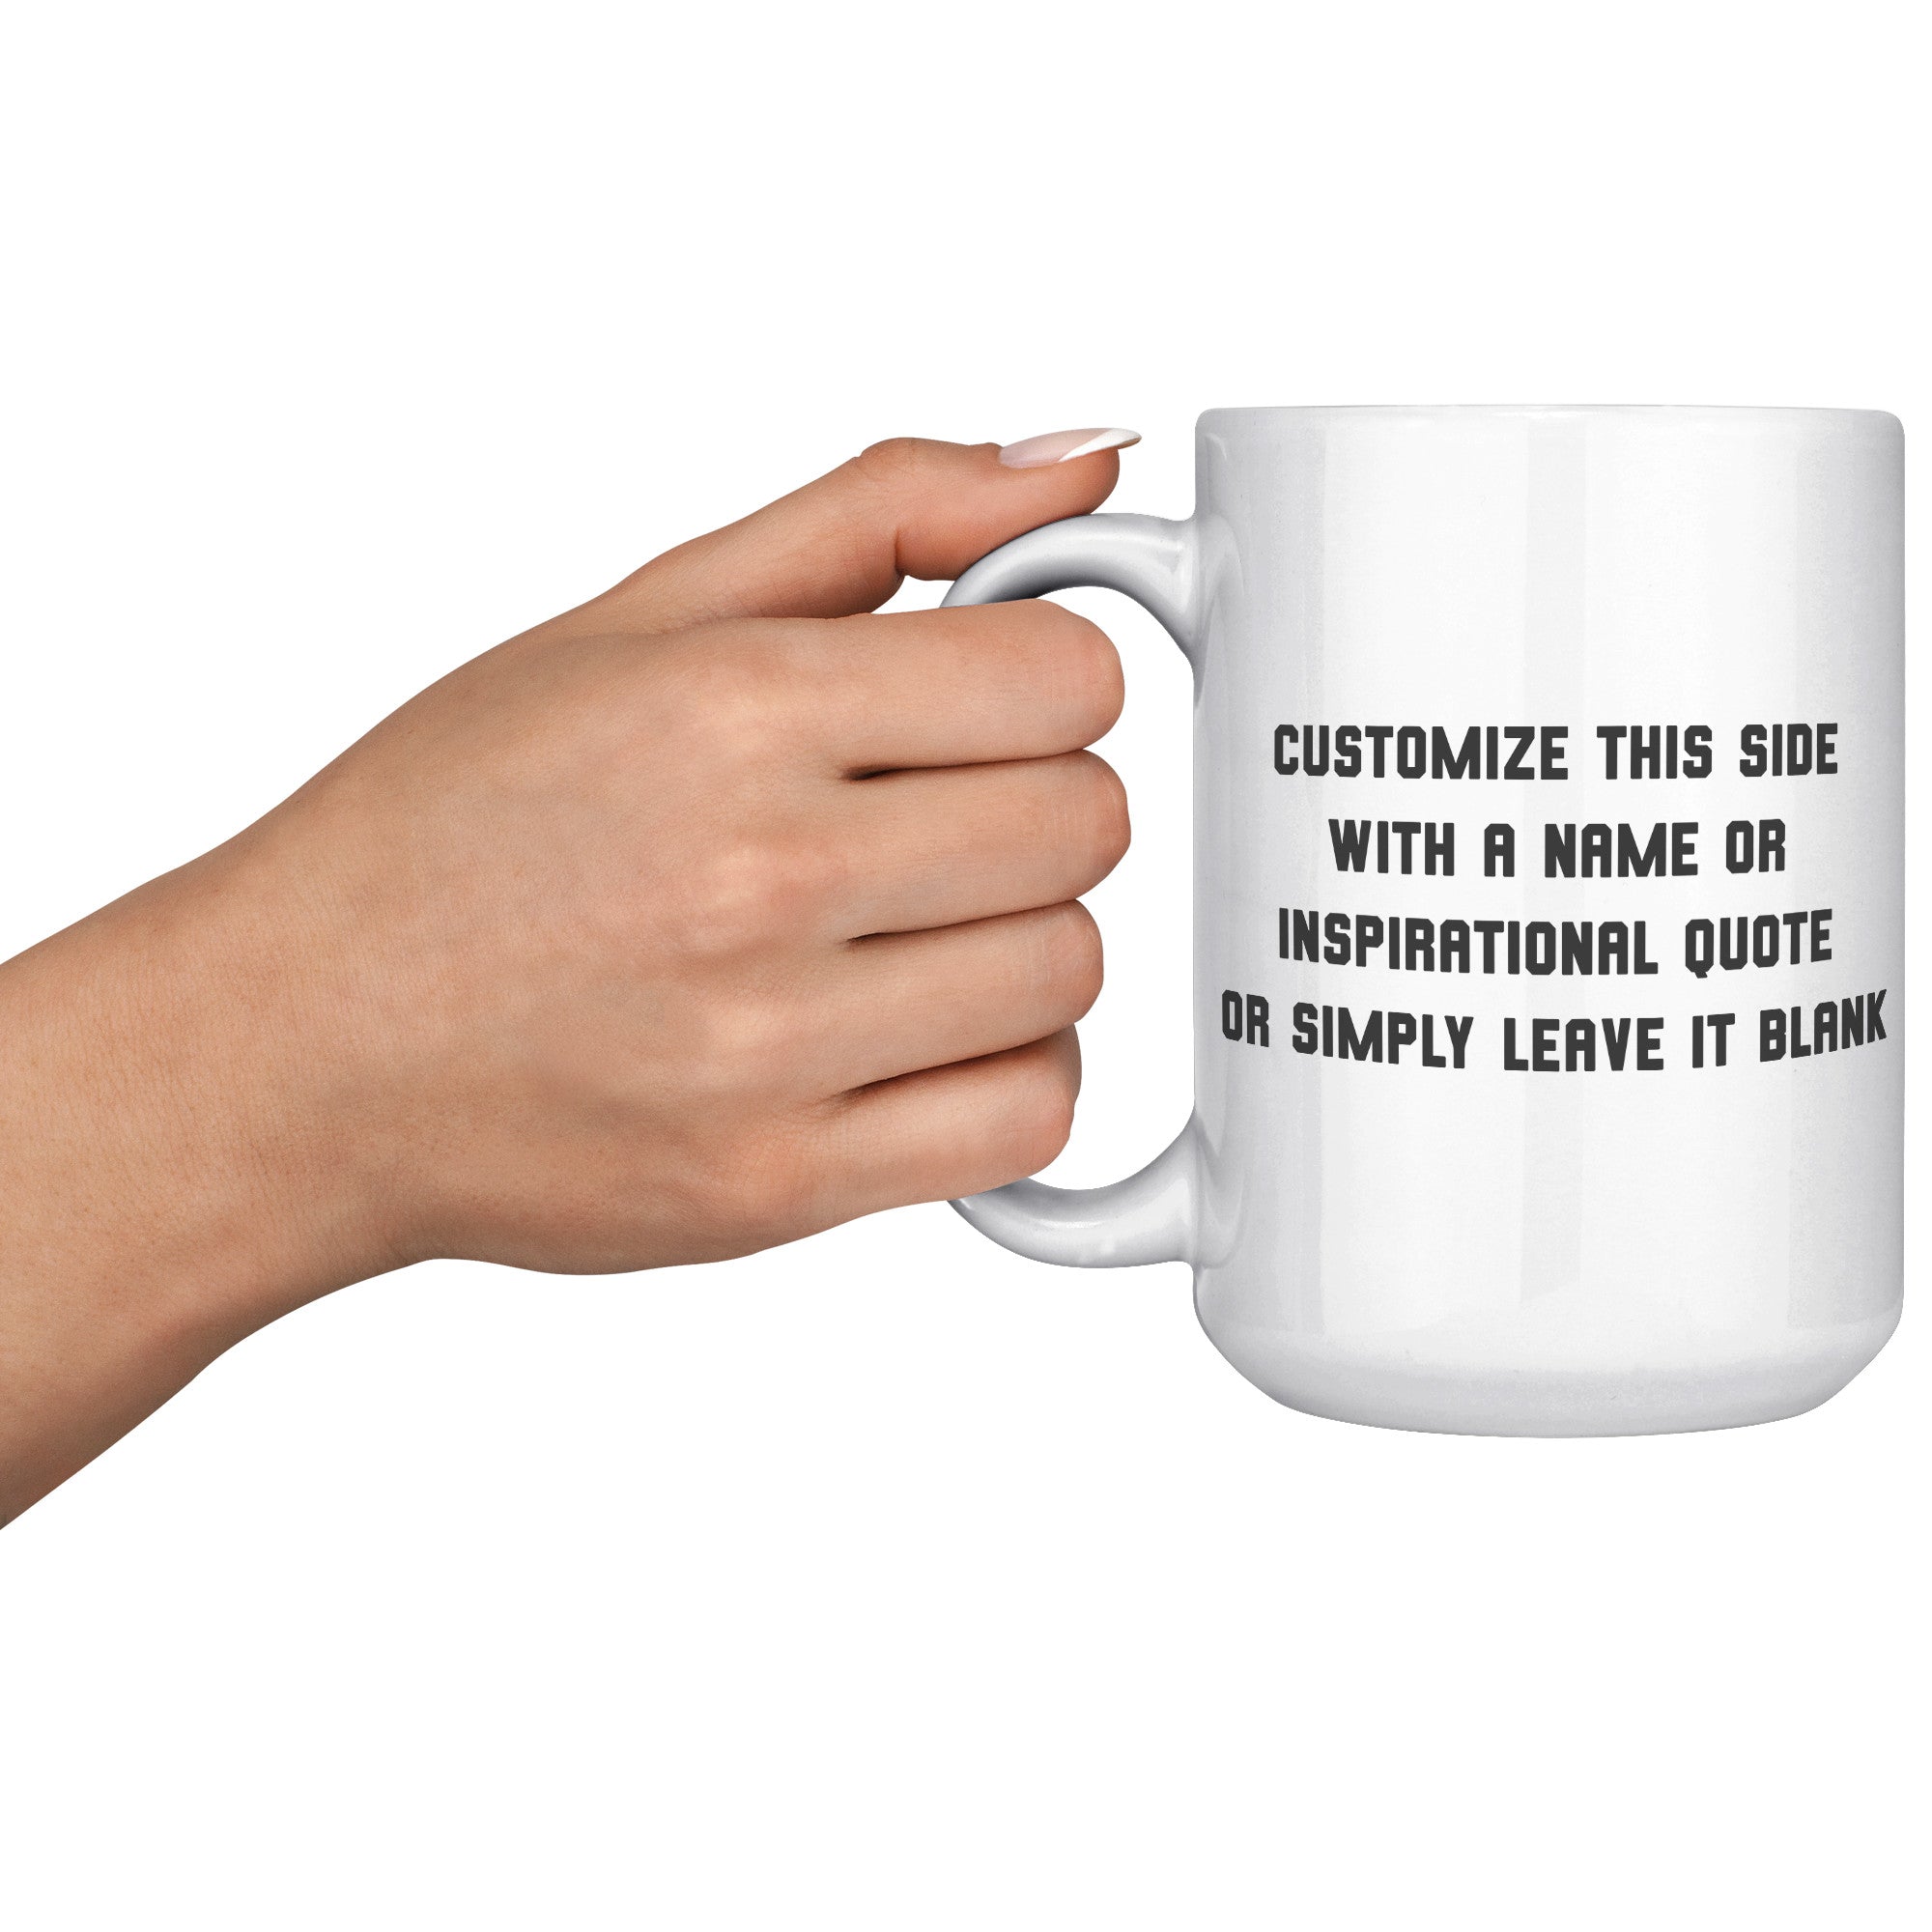 "Female Runner Coffee Mug - Inspirational Running Quotes Cup - Perfect Gift for Women Runners - Motivational Marathoner's Morning Brew" - L1